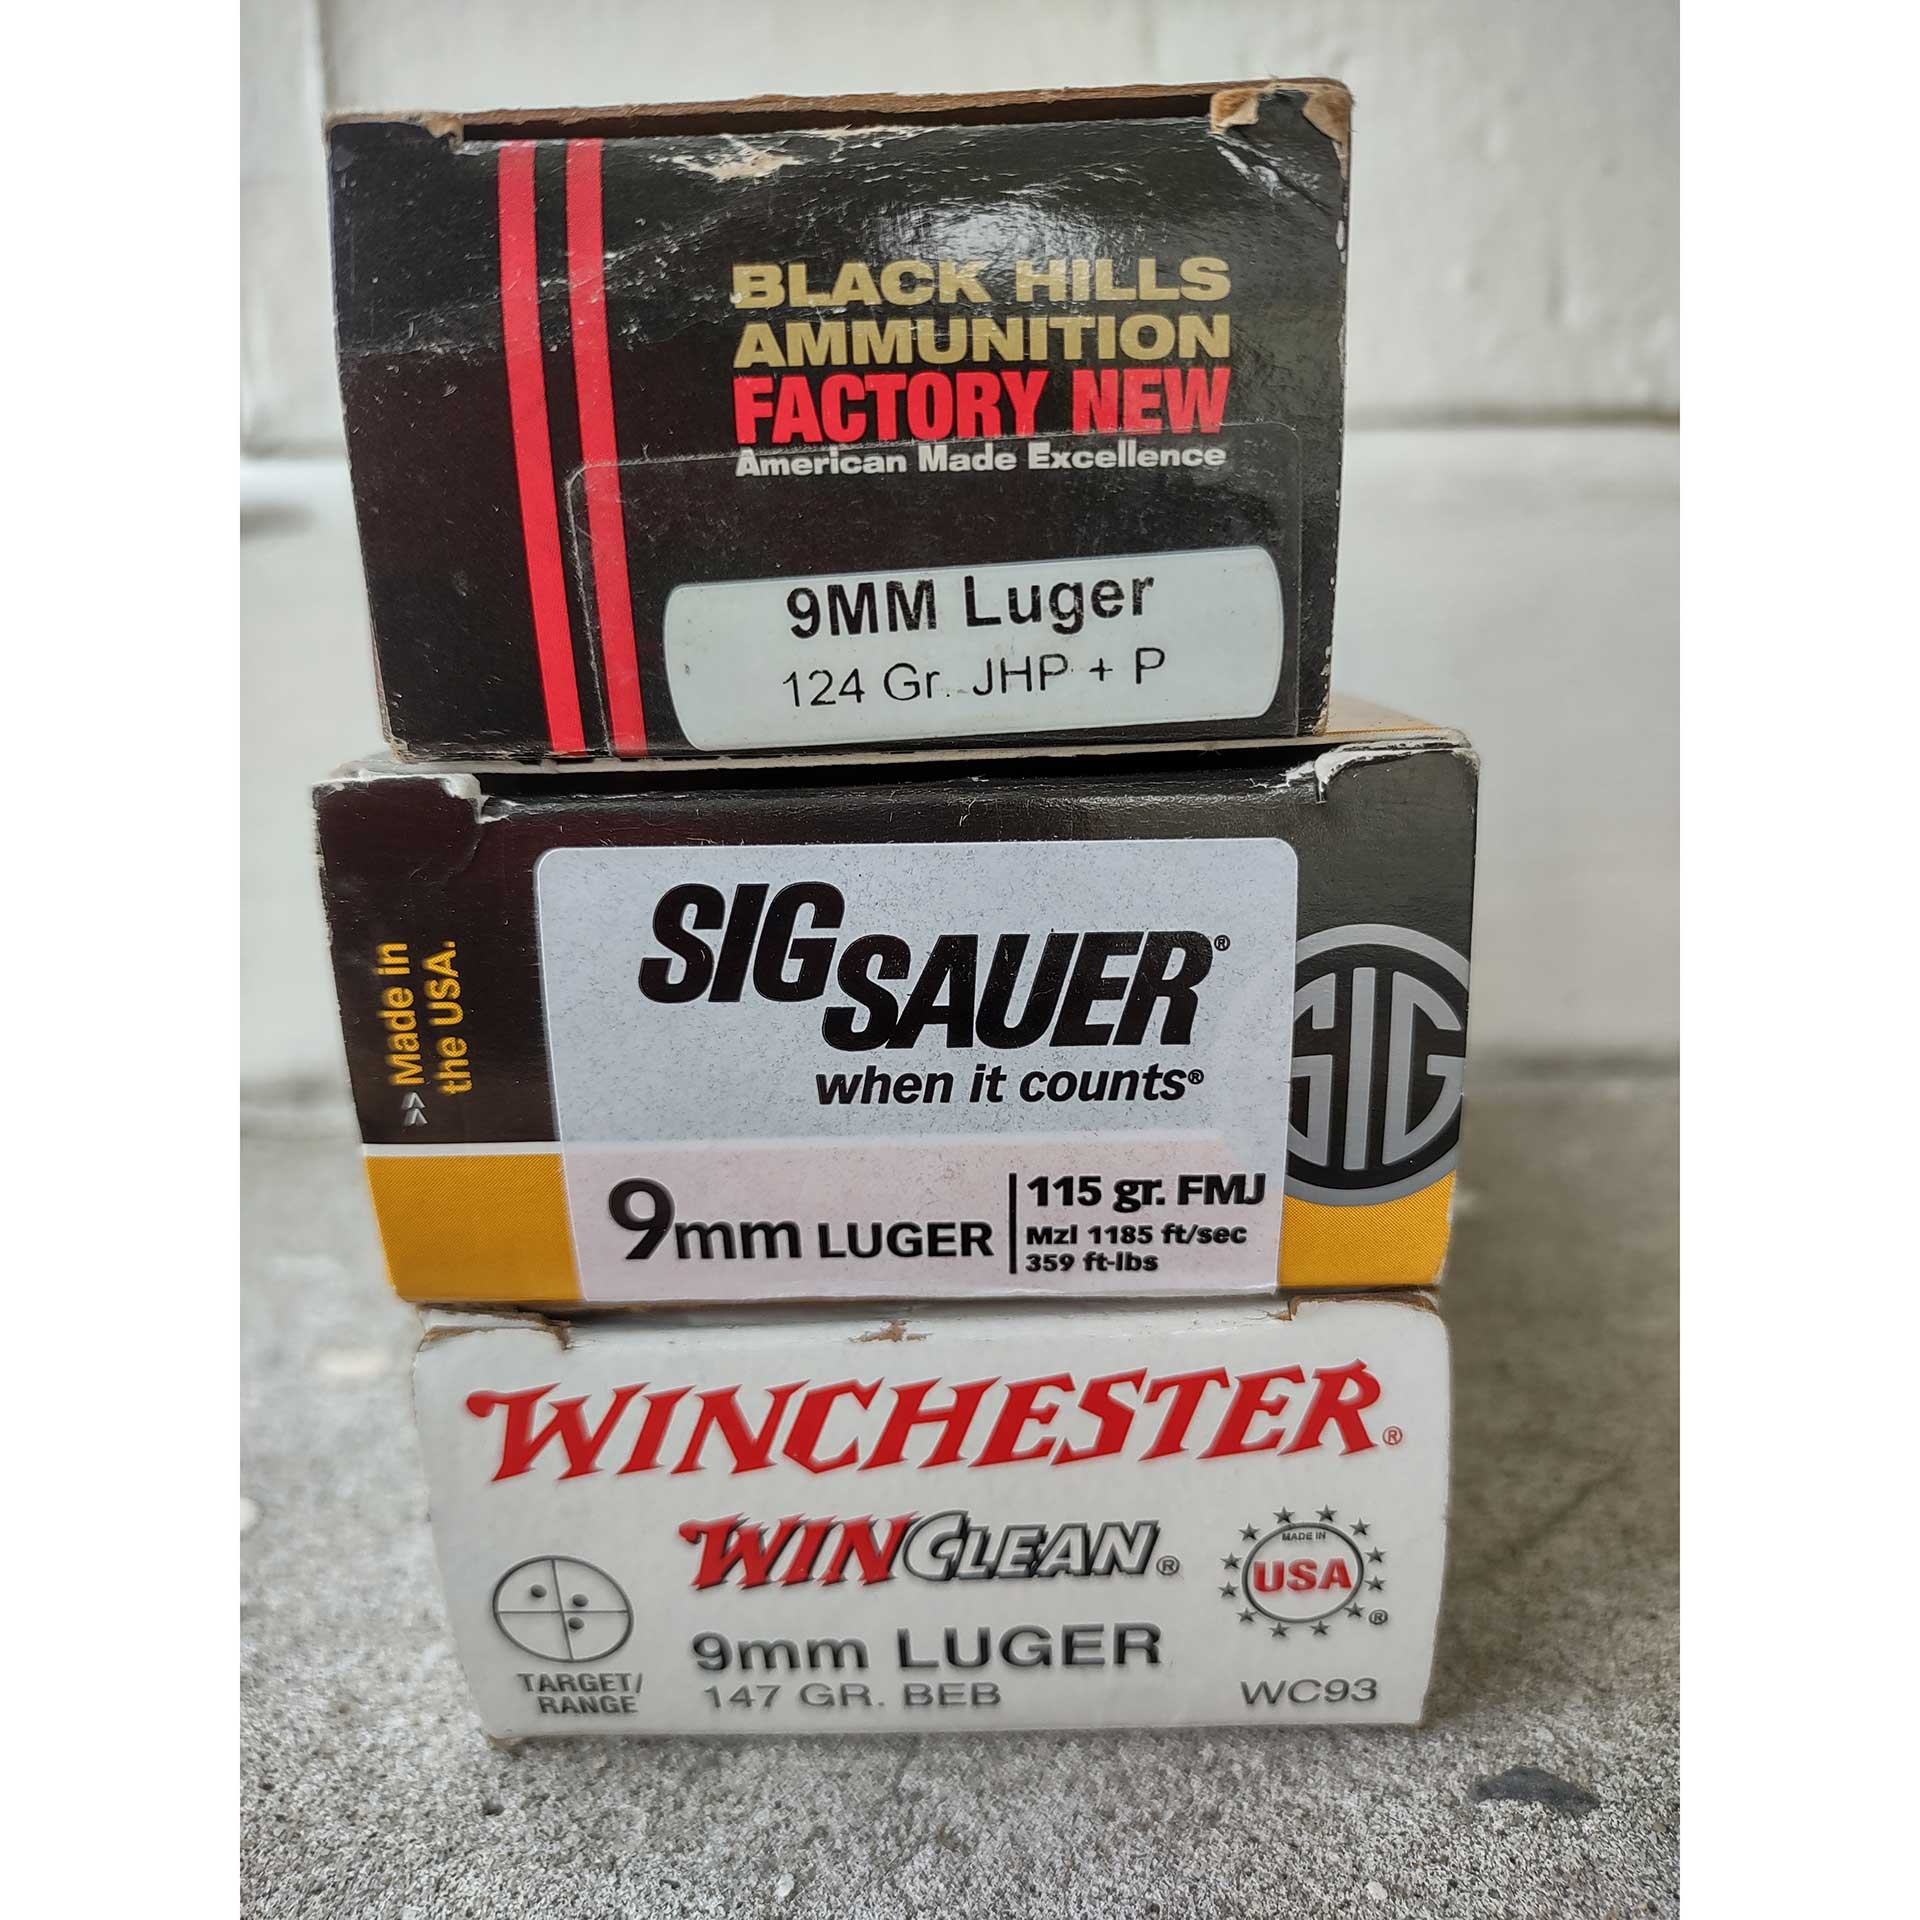 A stack of 9mm Luger ammunition boxes, including Winchester, SIG Sauer and Black Hills cartridges.